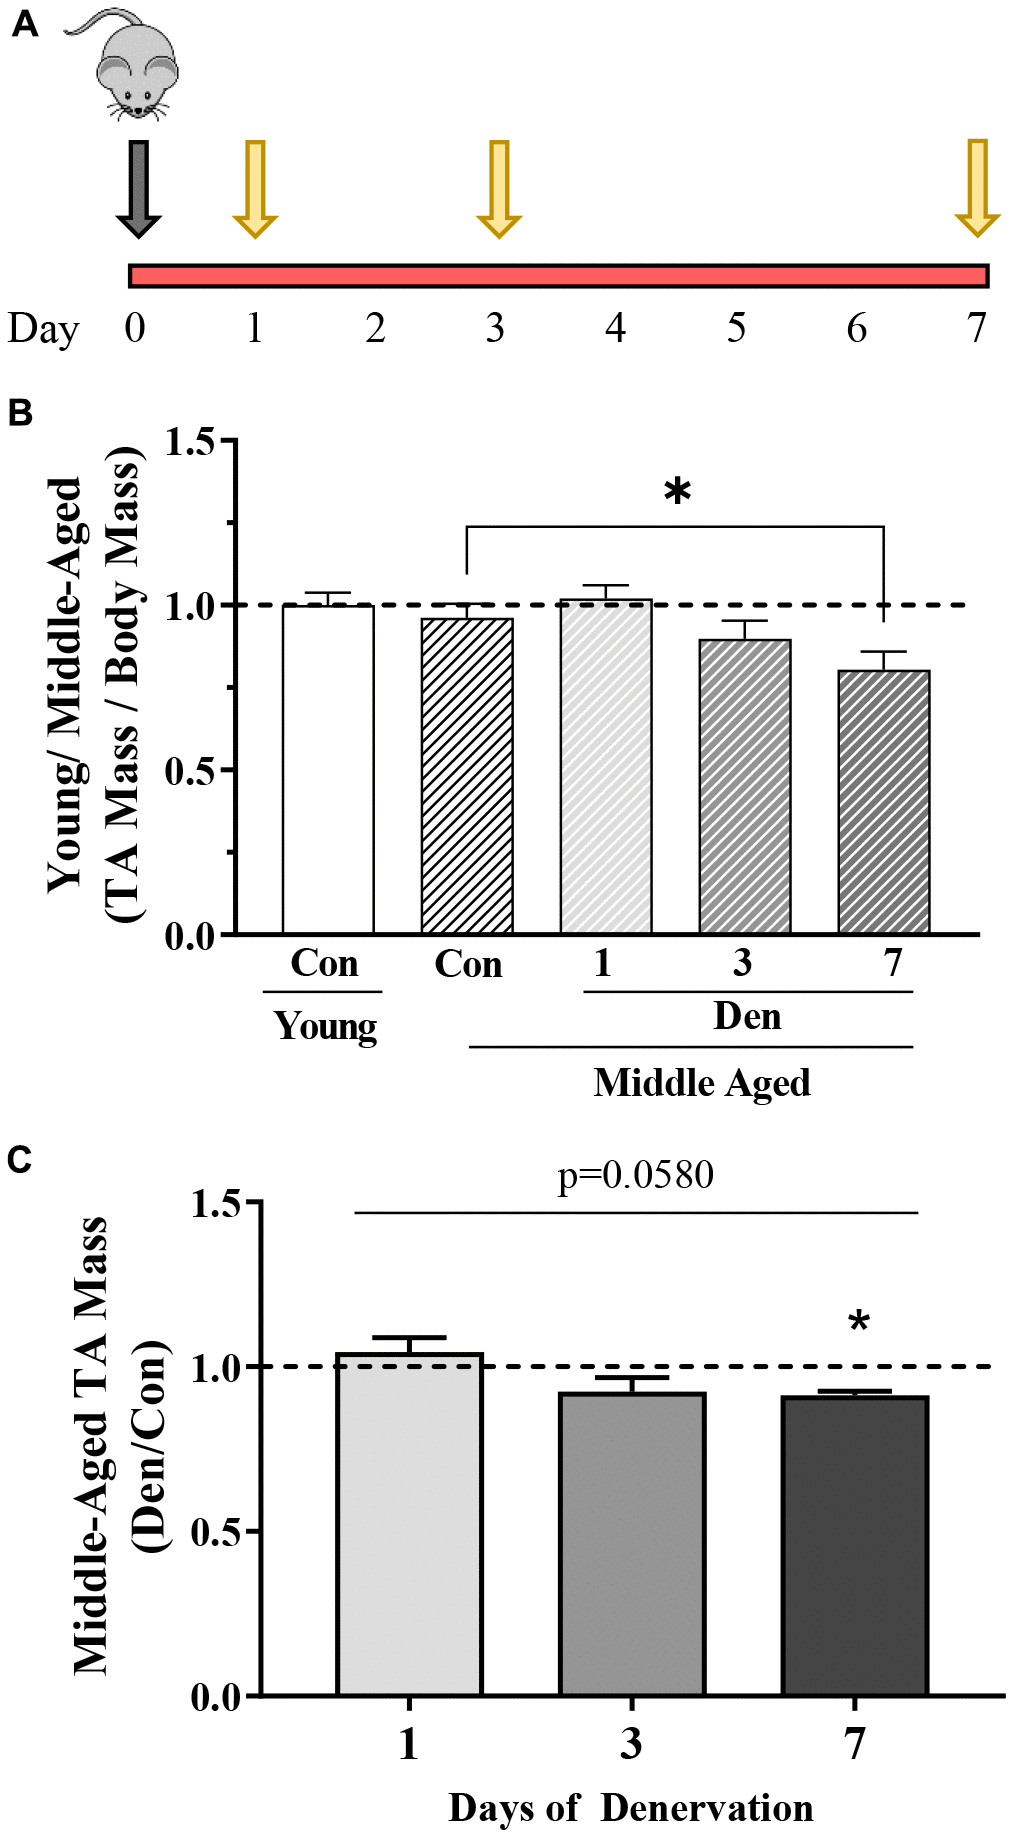 Overview of study design and changes in muscle mass with age in the absence and presence of 1, 3 or 7 days of denervation. (A) Schematic representation of the study design. Middle-aged mice (MA, ~15 months old) underwent unilateral sciatic denervation for 1, 3 or 7 days. Young mice (YC, ~5 months old) were used as an early adult control. (B) Tibialis anterior (TA) muscle mass corrected for body mass in young control, and middle-aged control and 1-, 3- or 7-day denervated limbs. (C) TA mass represented as fold of age-matched control. Values are means ± SEM. Main effects of den are represented on graph. *p